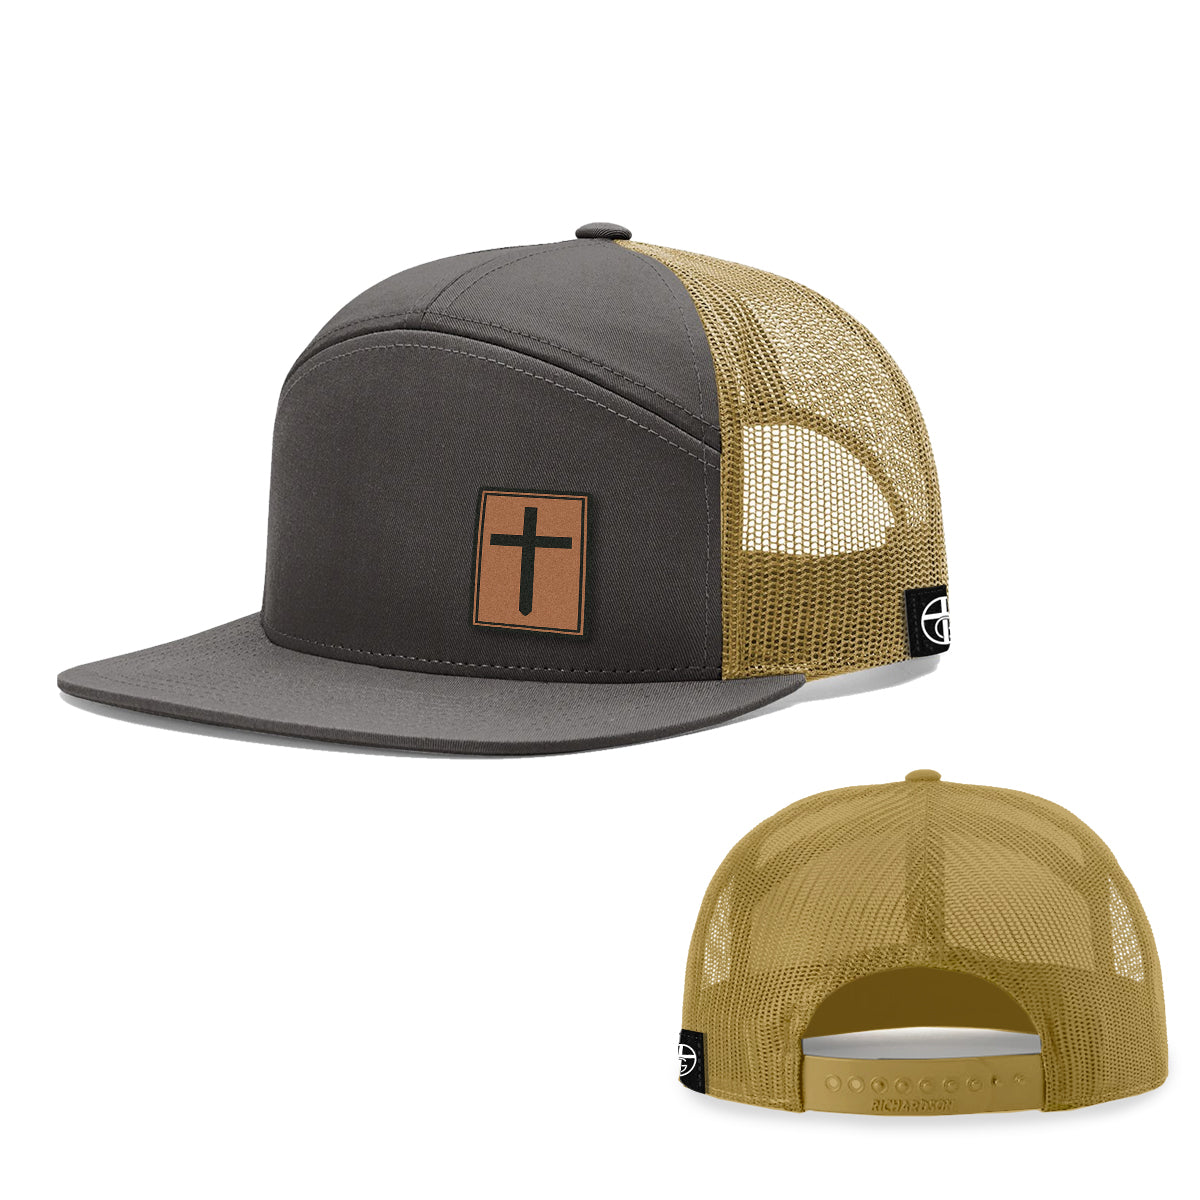 Cross Leather Patch 7 Panel Hats